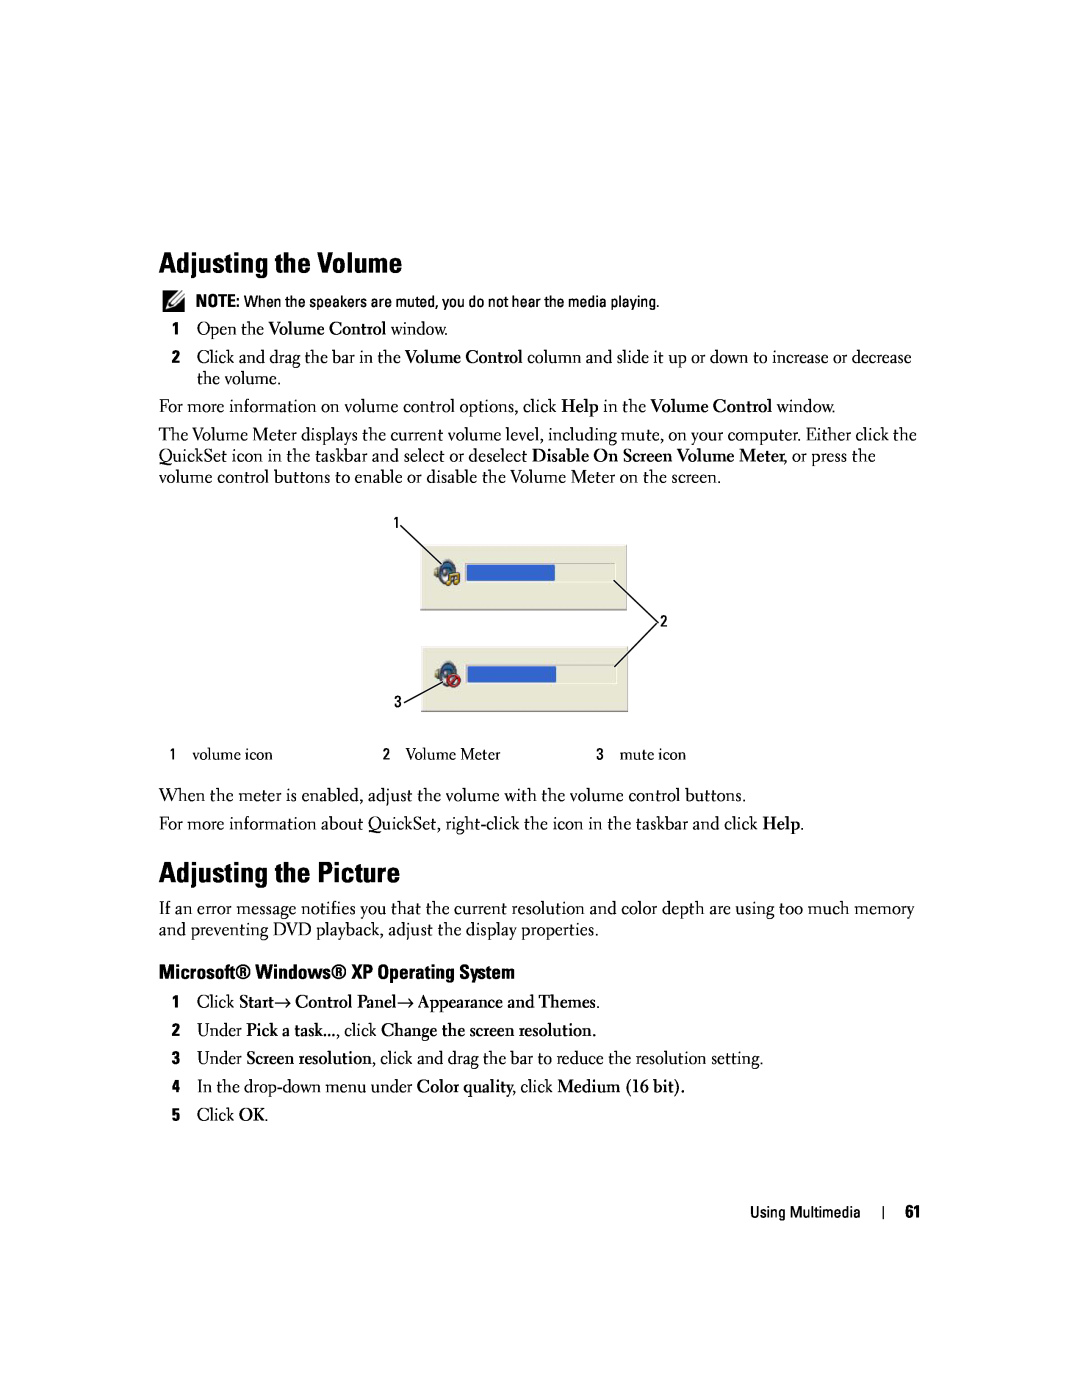 Dell PP24L manual Adjusting the Volume, Adjusting the Picture, Microsoft Windows XP Operating System 